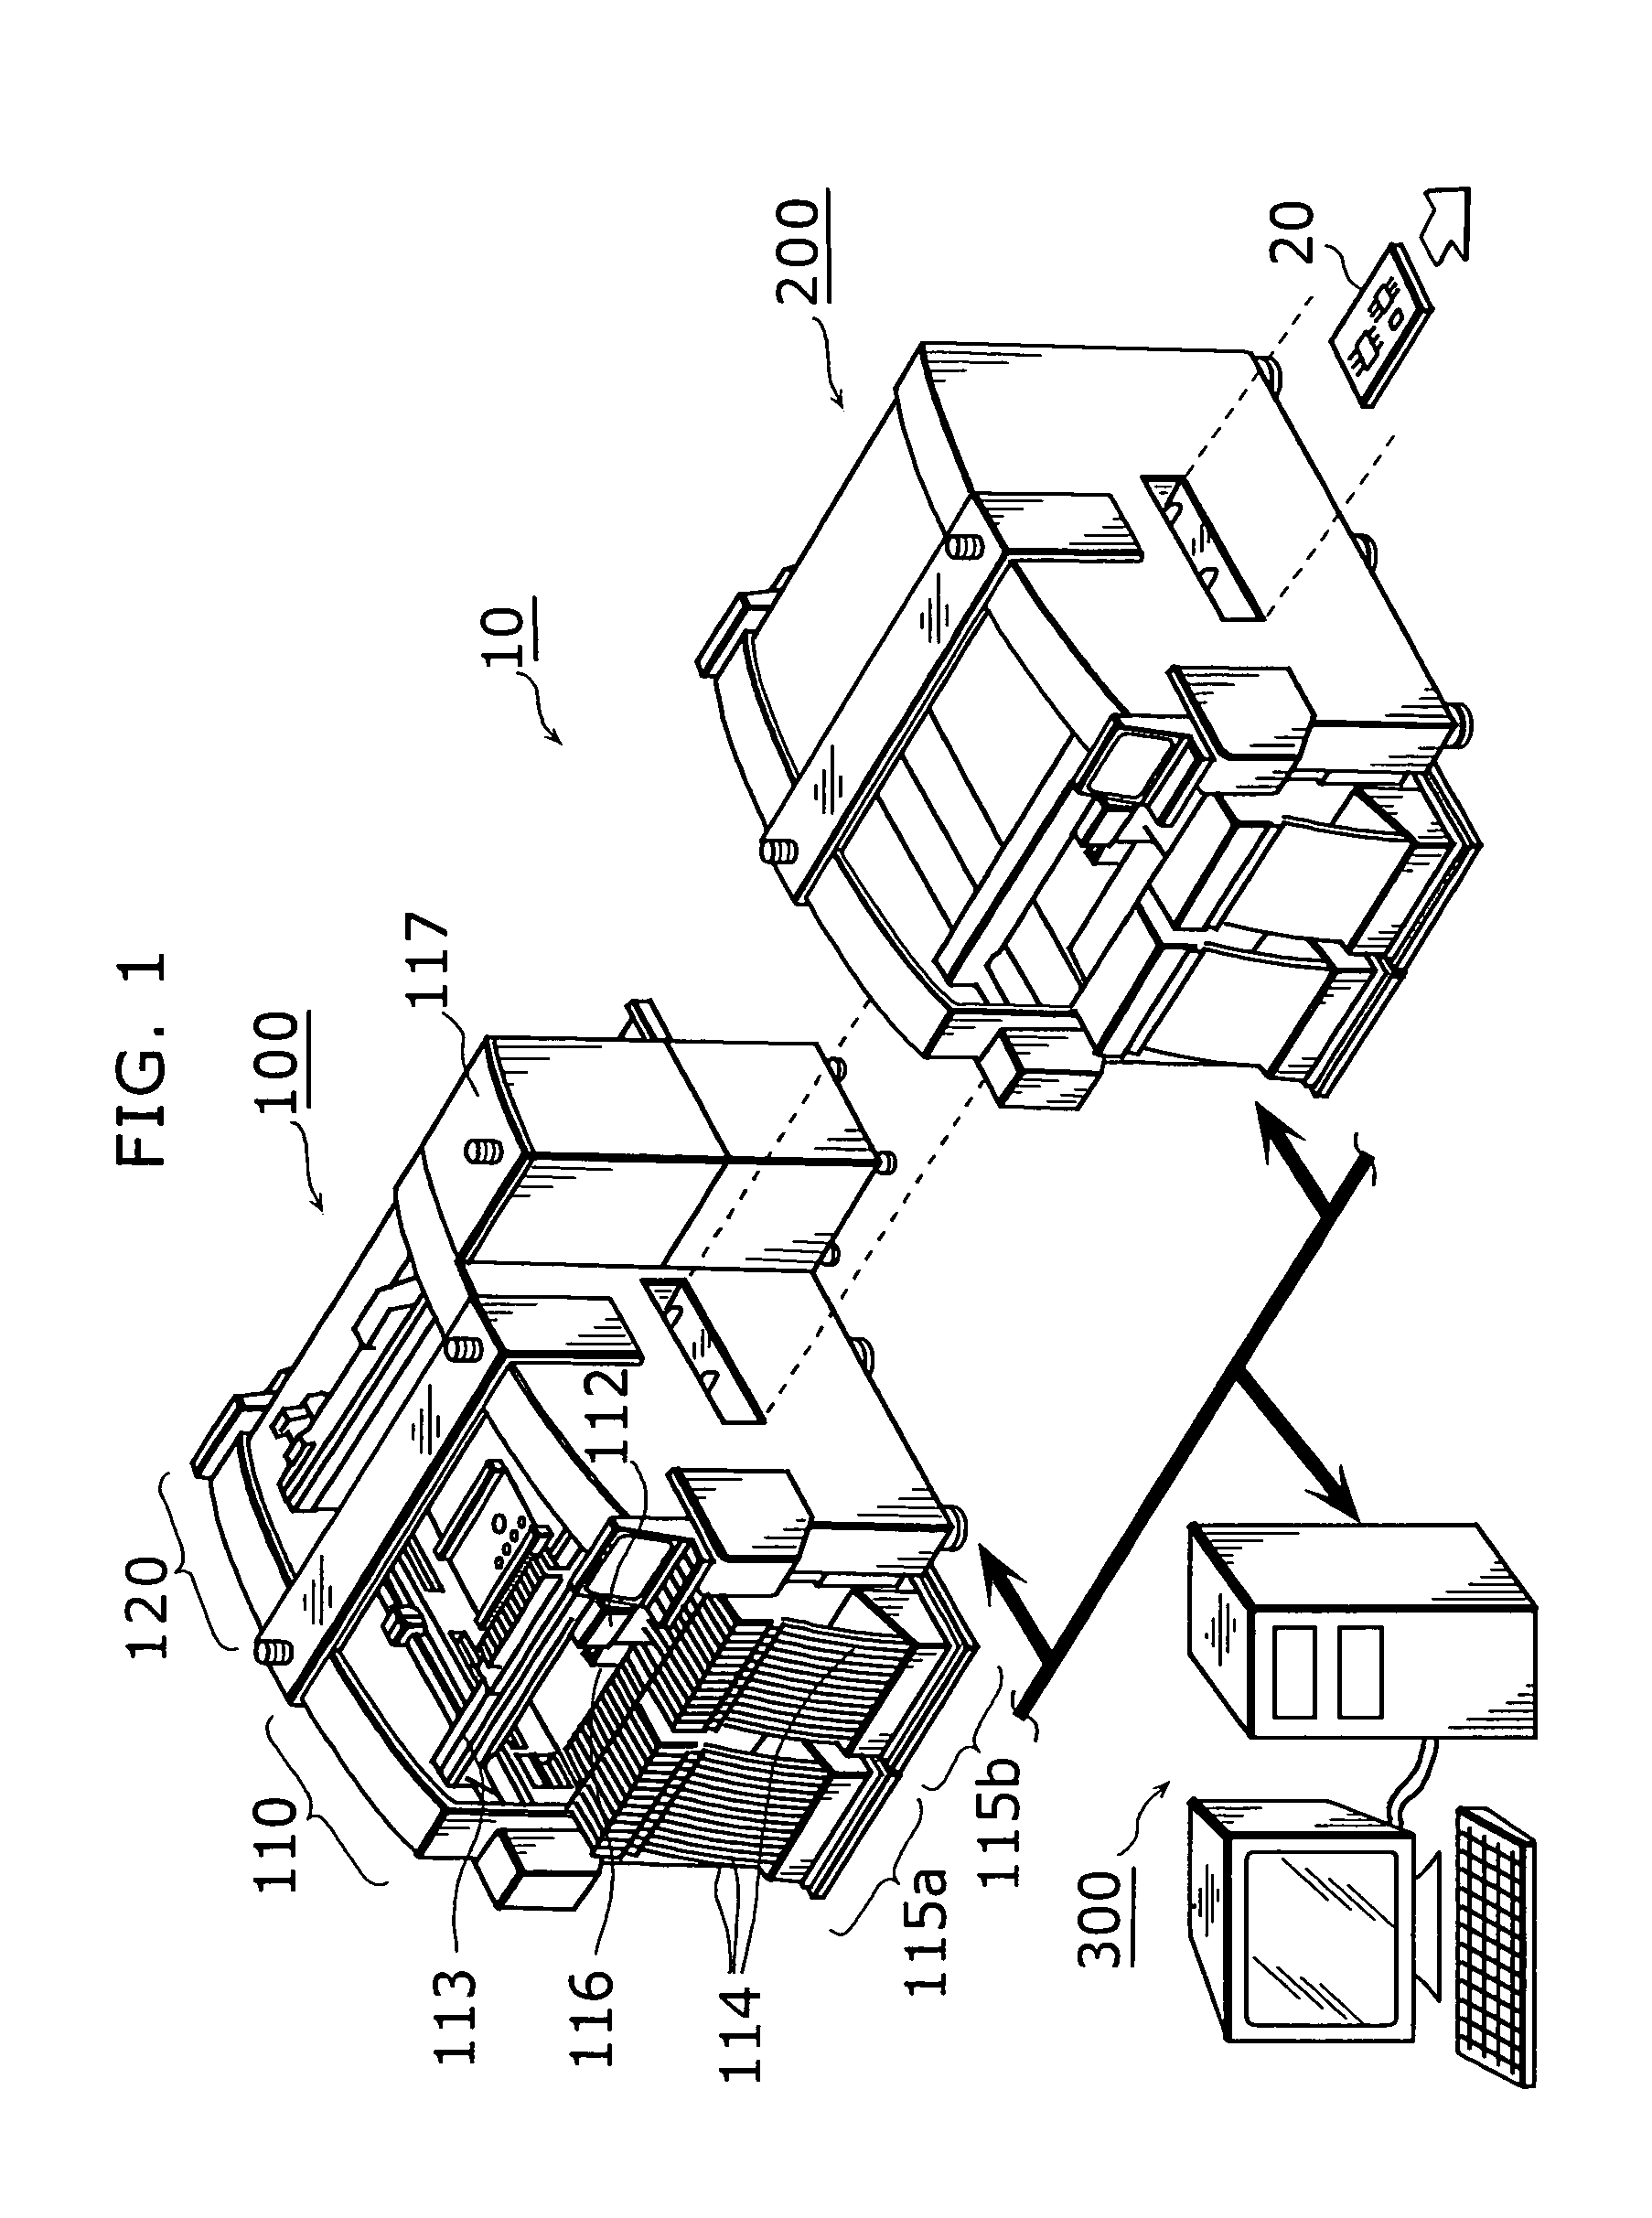 Method for optimization of an order of component mounting, apparatus using the same, and mounter